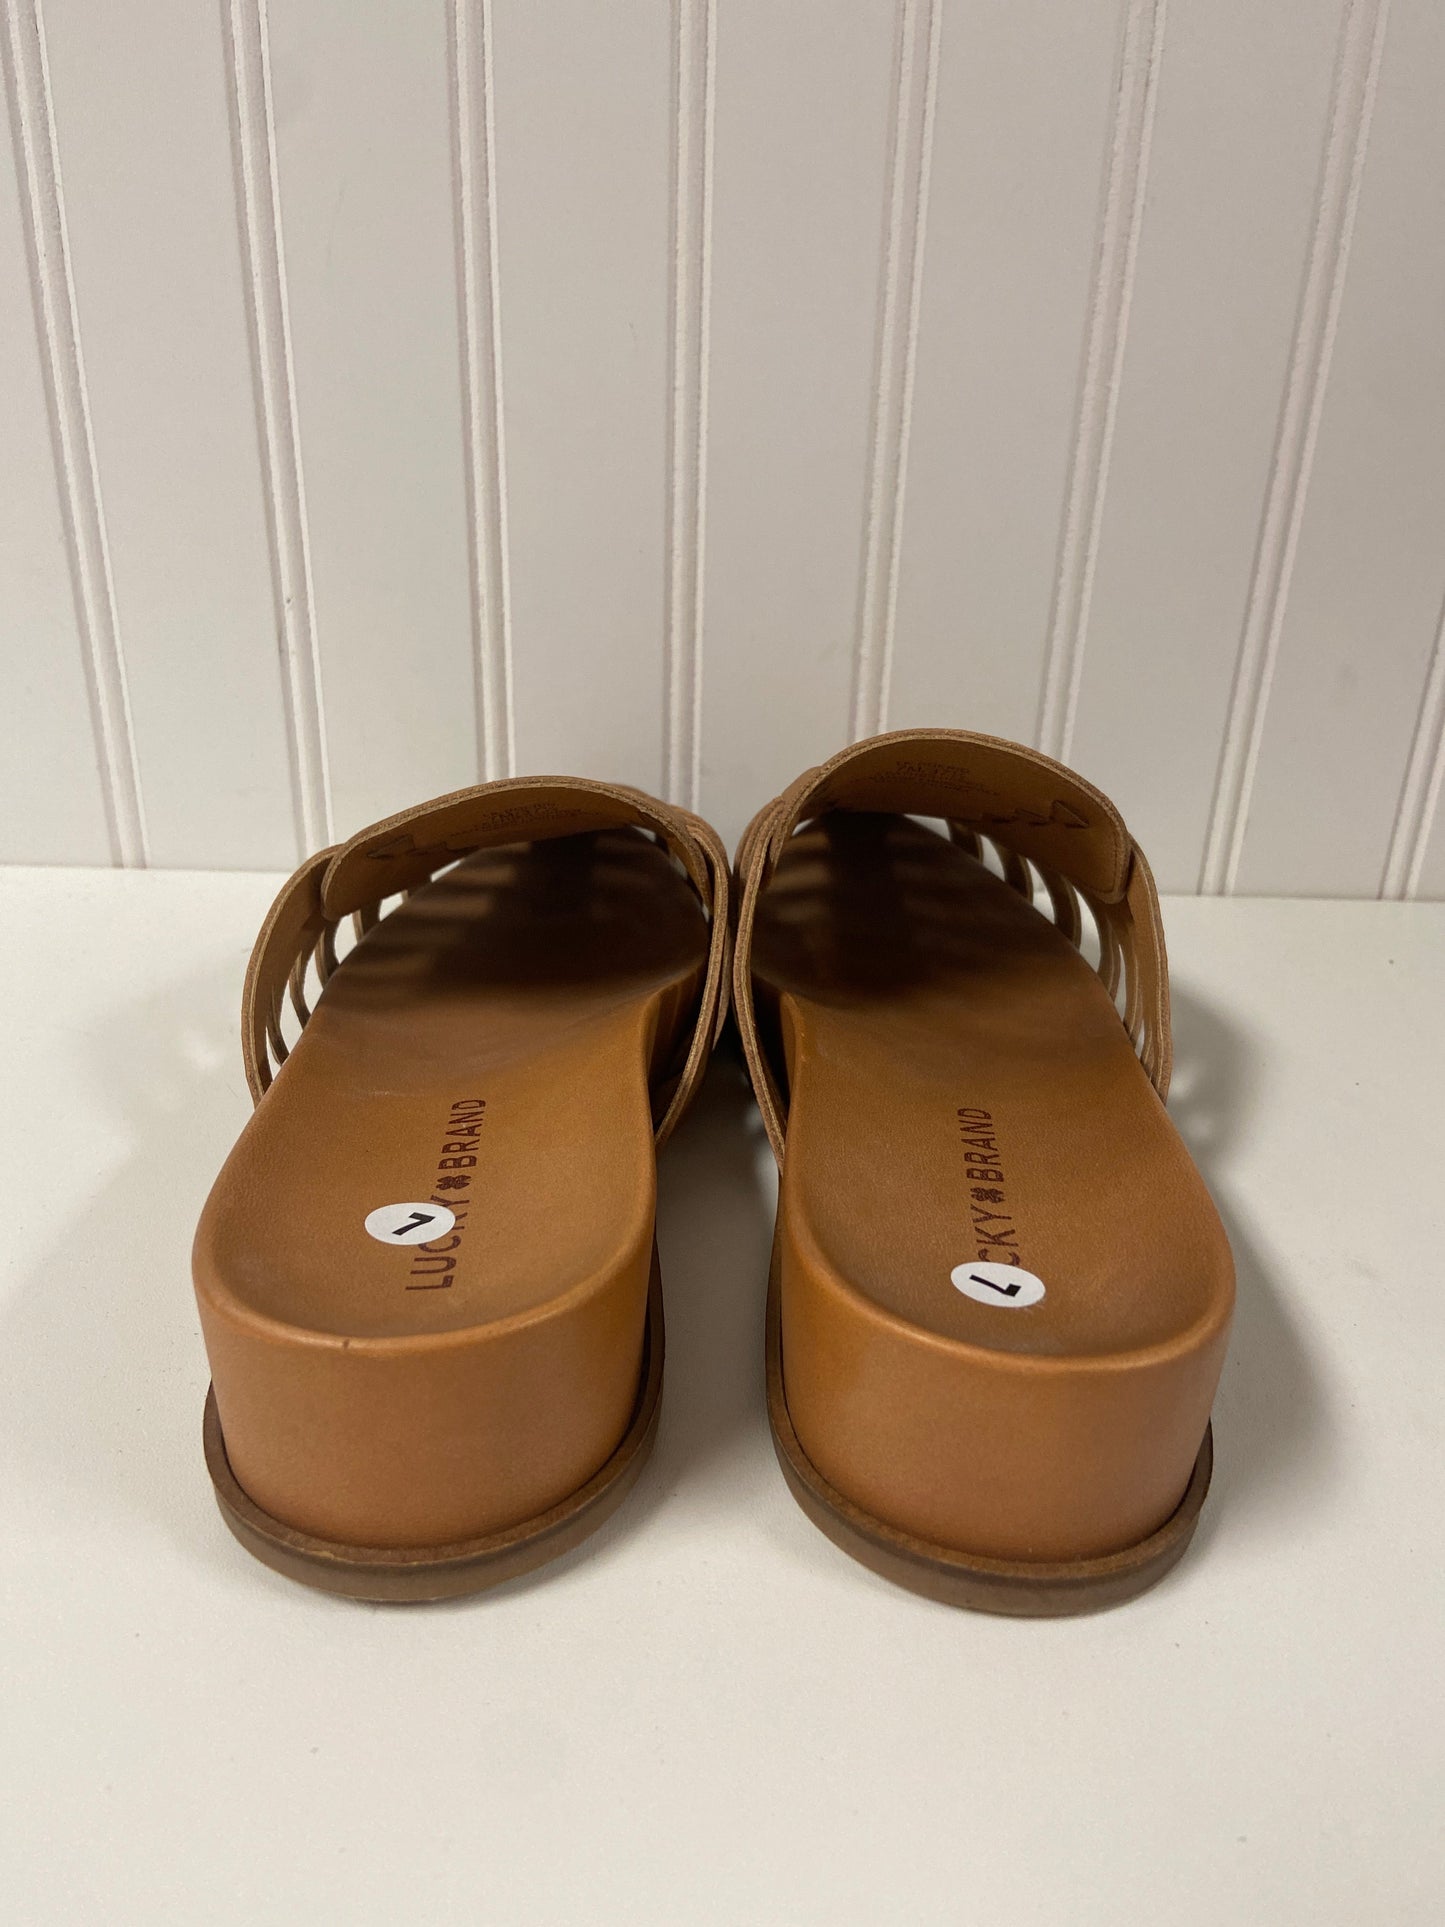 Brown Shoes Flats Lucky Brand, Size 7